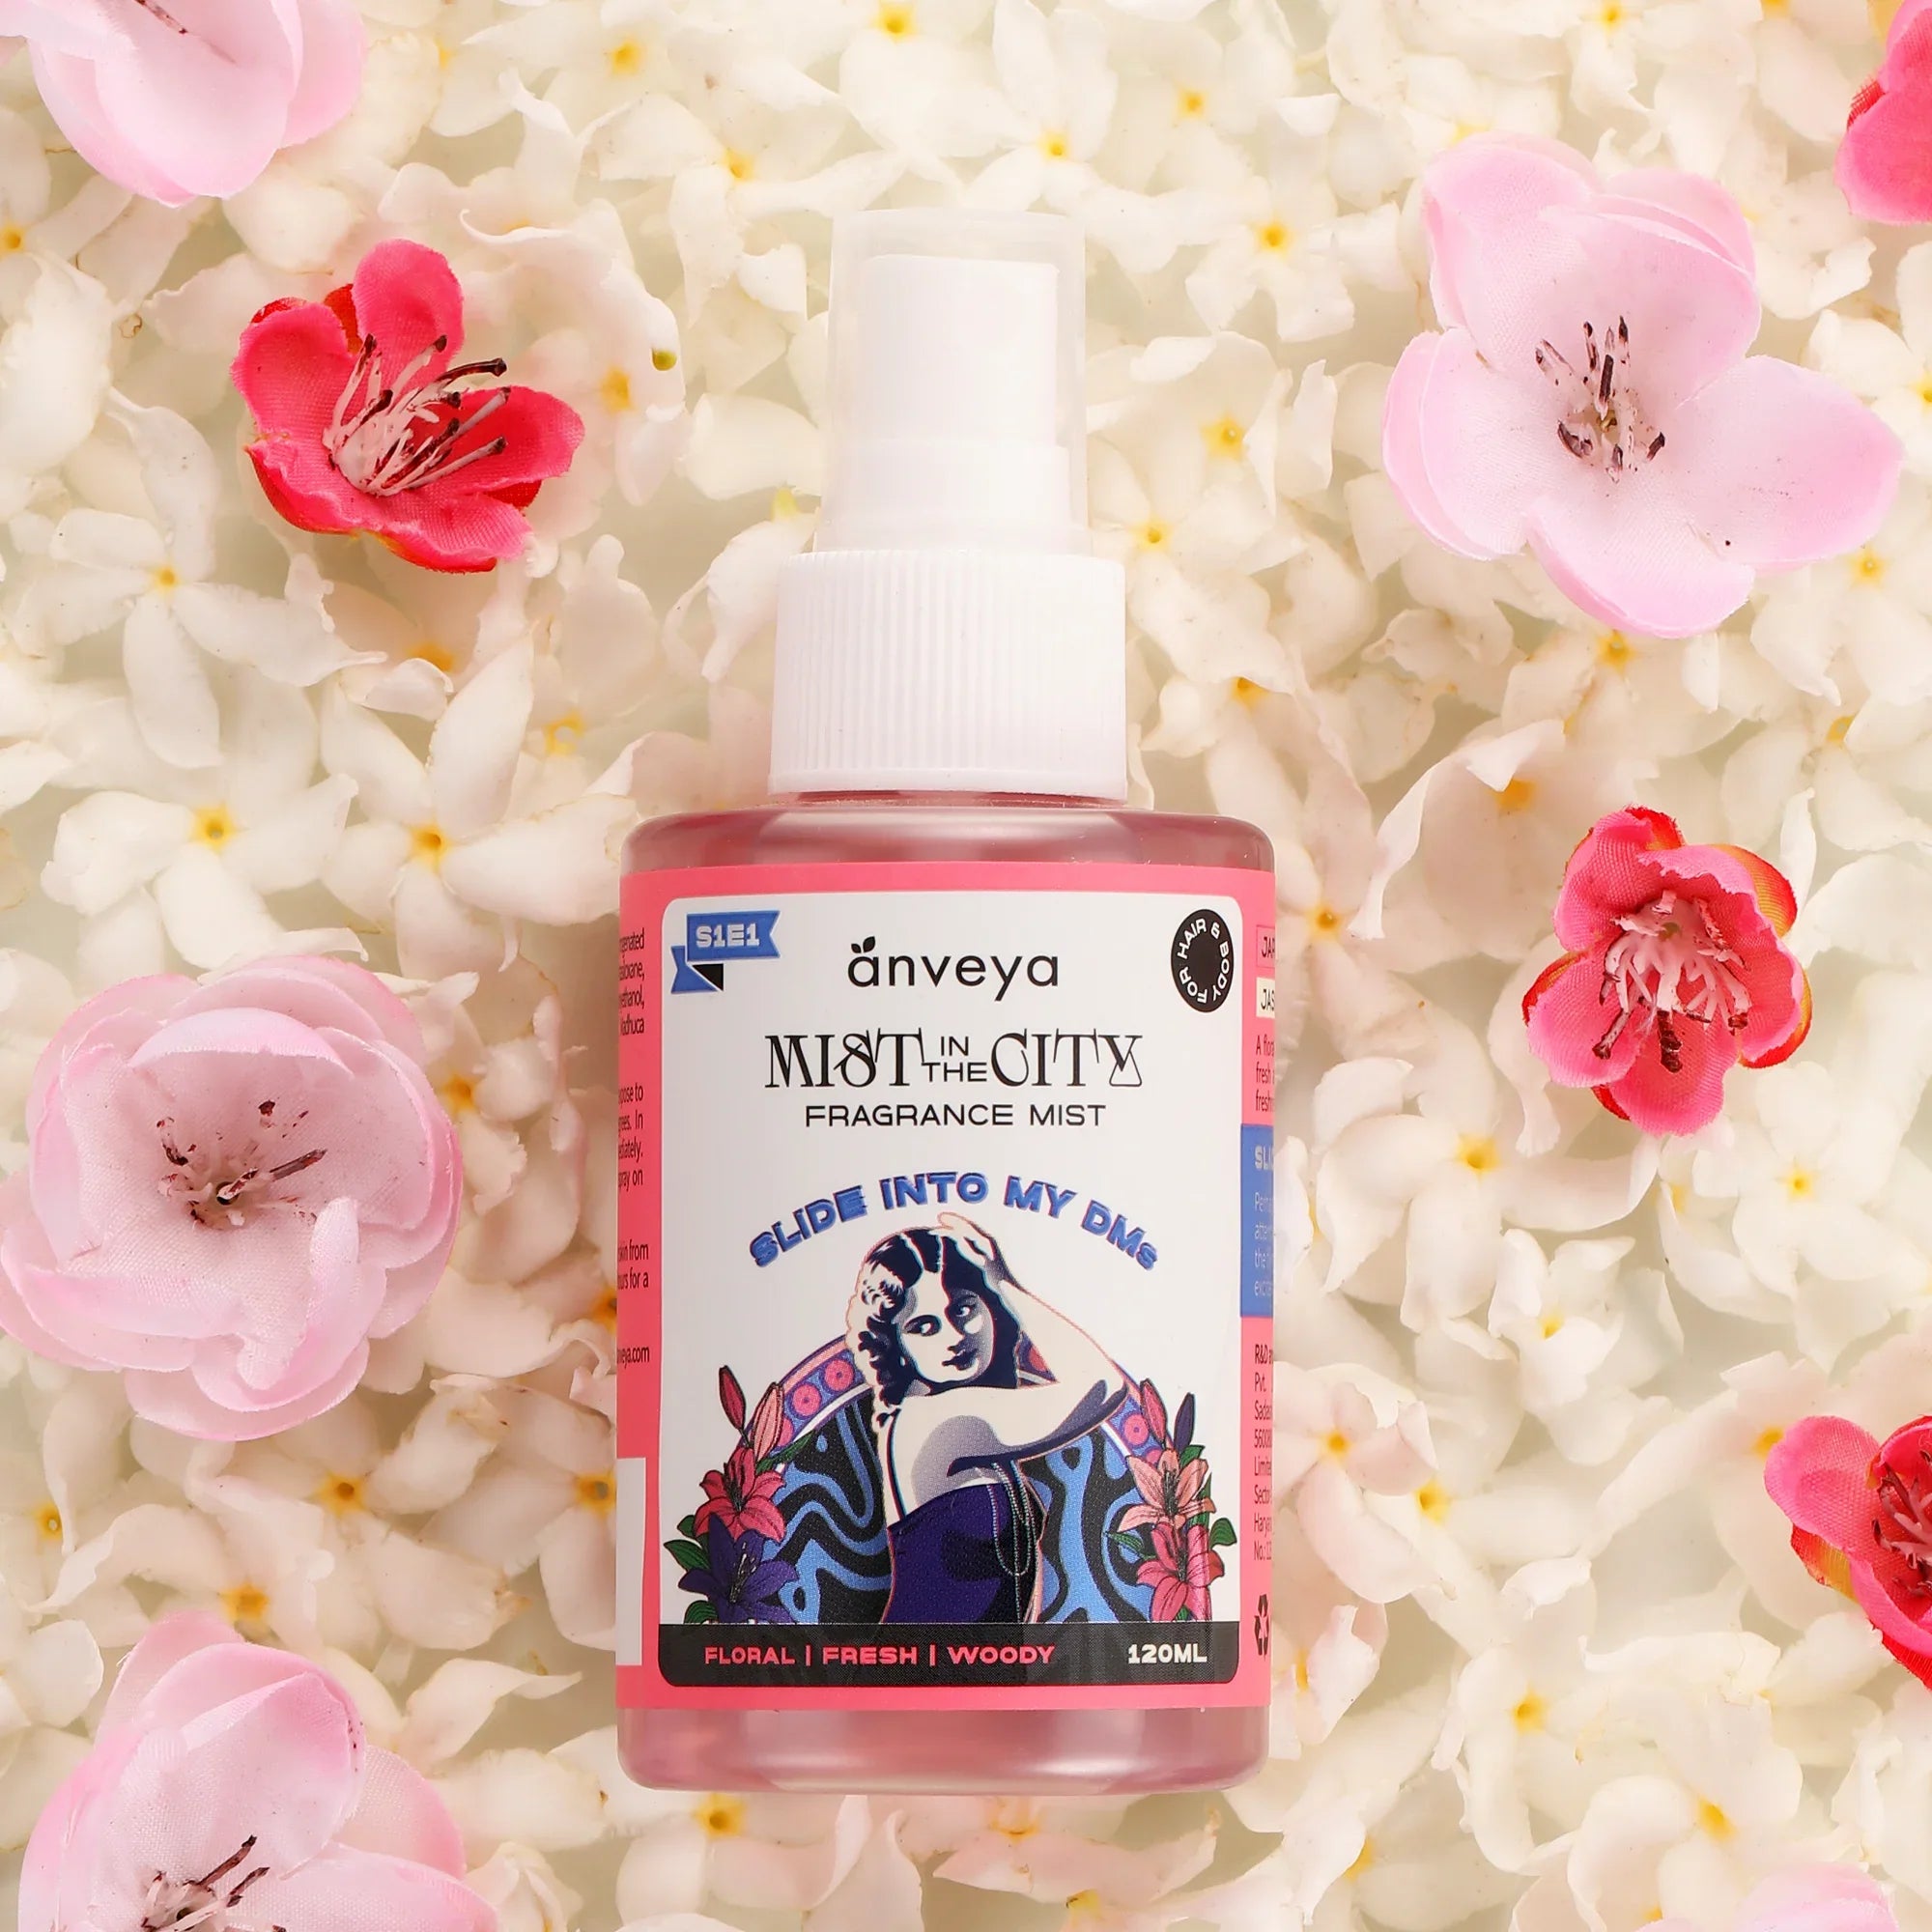 Detailed Review of Anveya Mist - EP 1: SLIDE INTO MY DMs